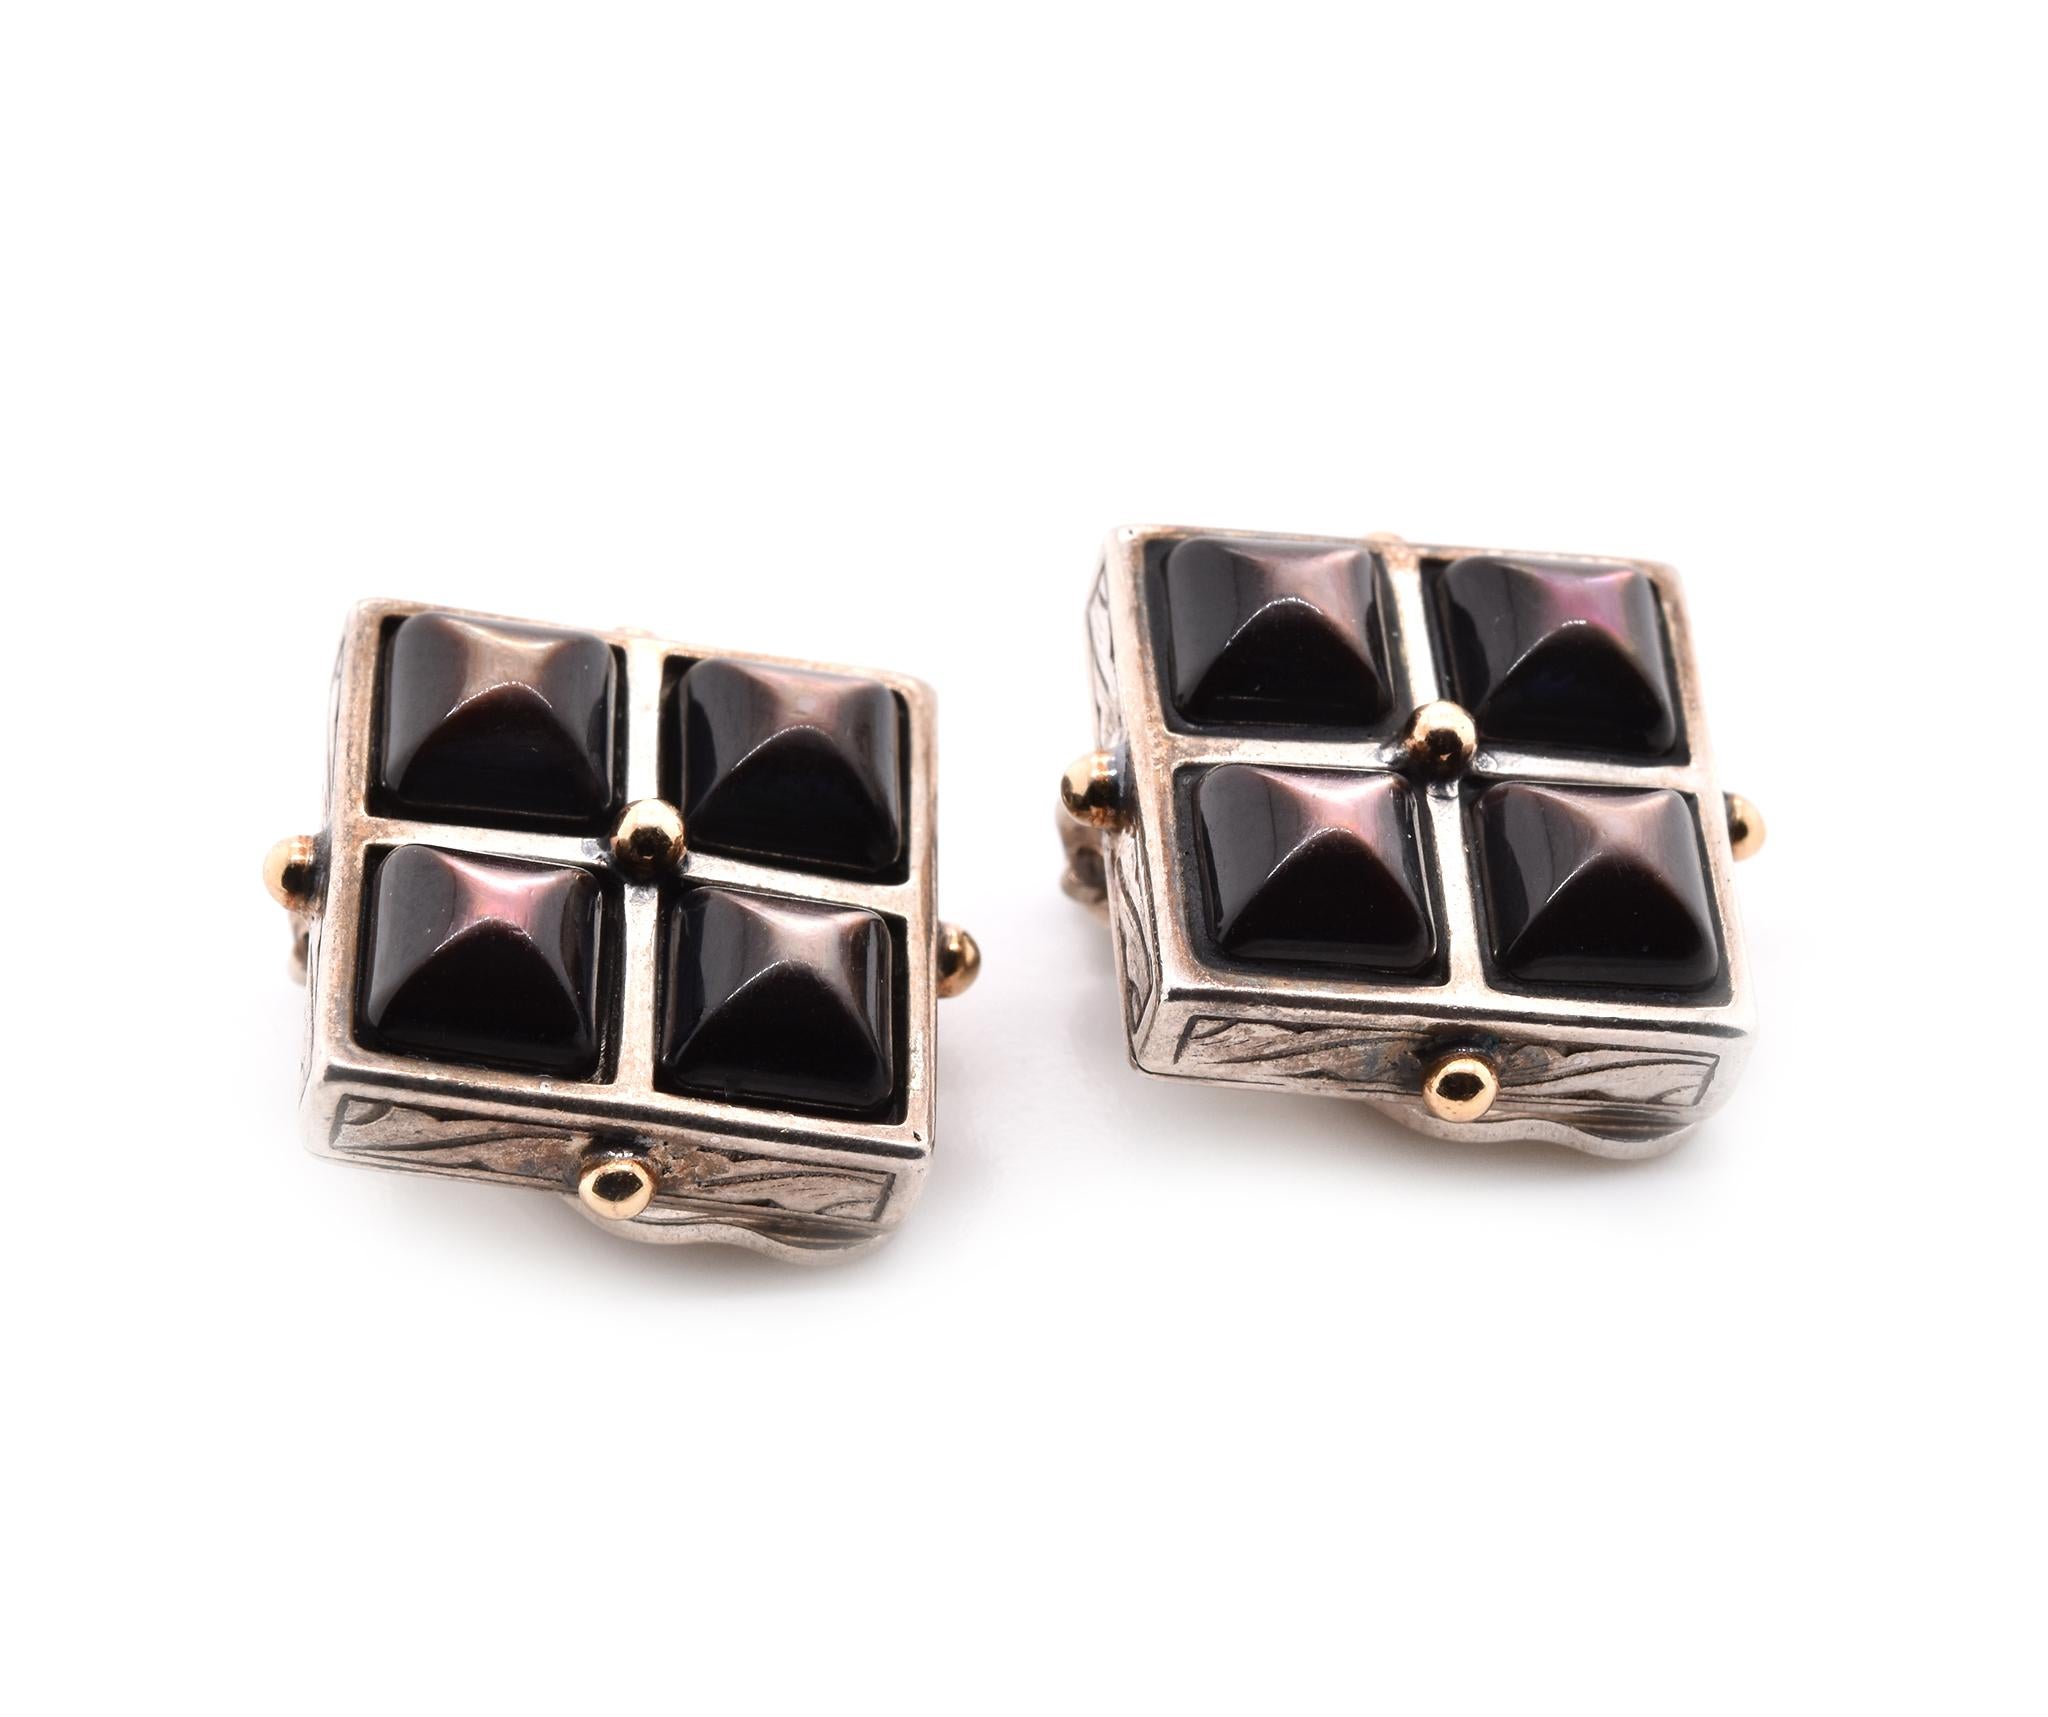 Designer: Stephen Dweck
Material: 18k yellow gold and sterling silver
Gemstone: brown Mother-of-Pearl
Dimensions: earrings measure 17.90mm x 17.90mm
Weight: 11.7 grams
